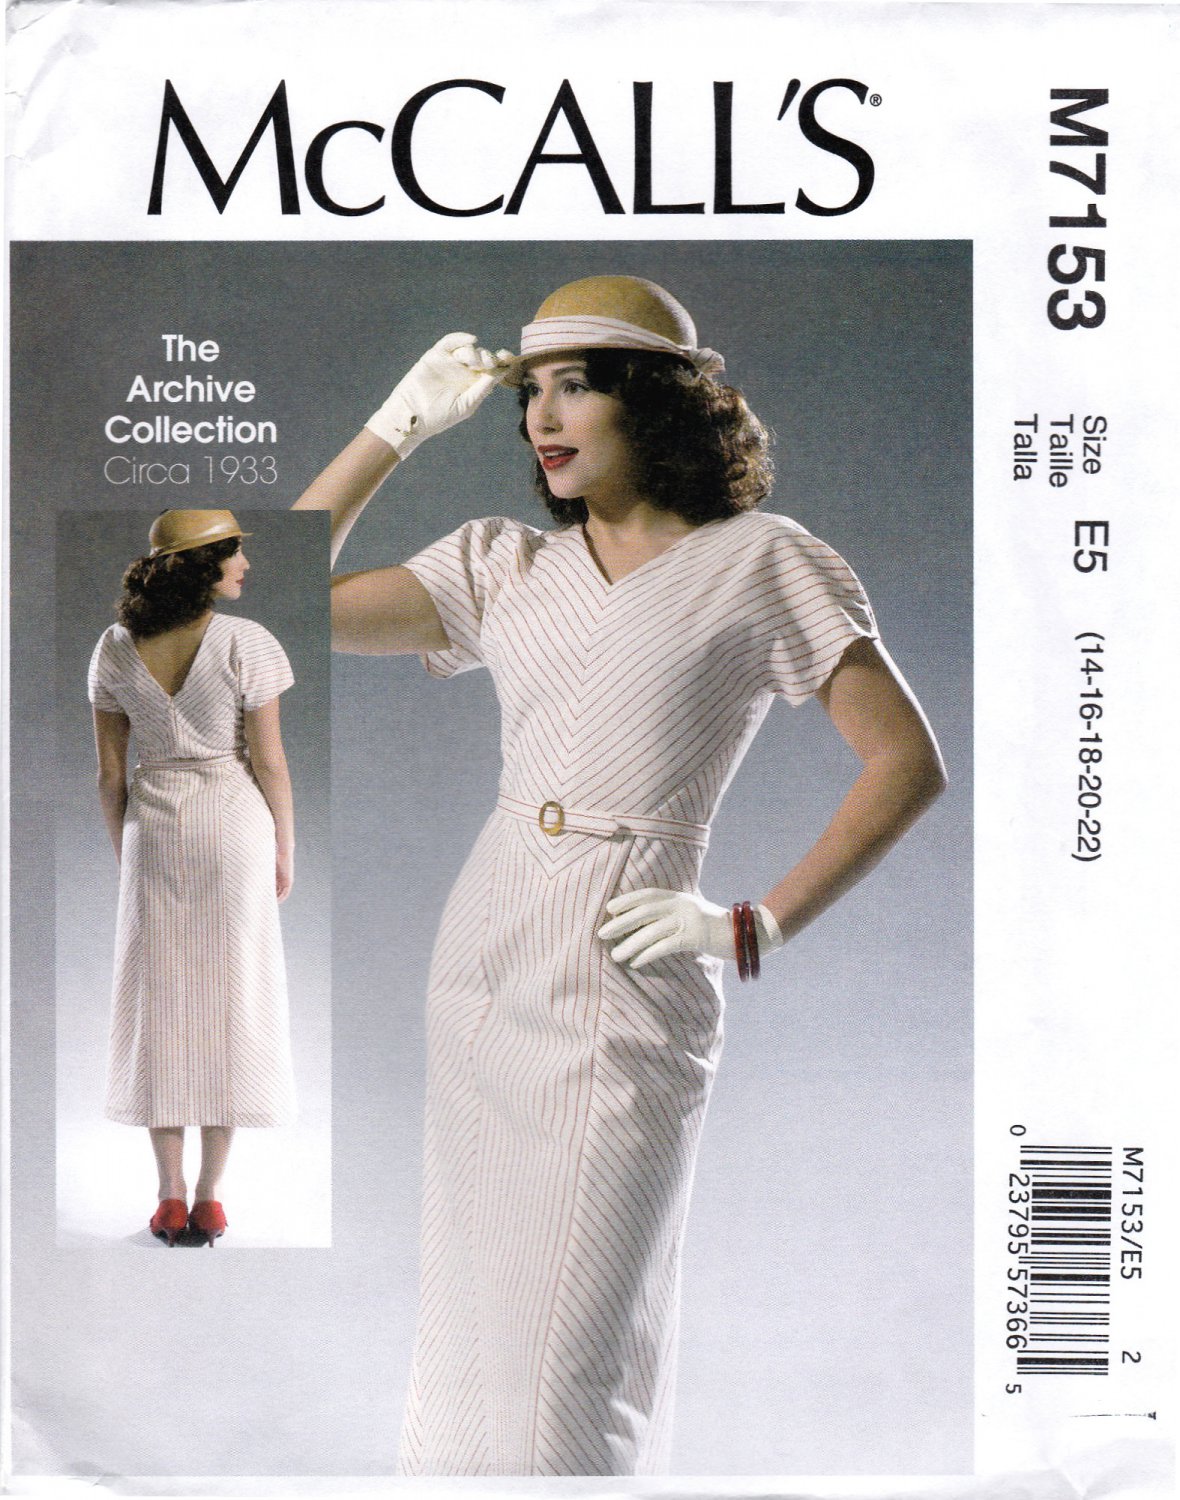 McCall's 7153 M7153 Womens Misses Dress Belt Sewing Pattern Retro 1933 Style Sizes 14-16-18-20-22